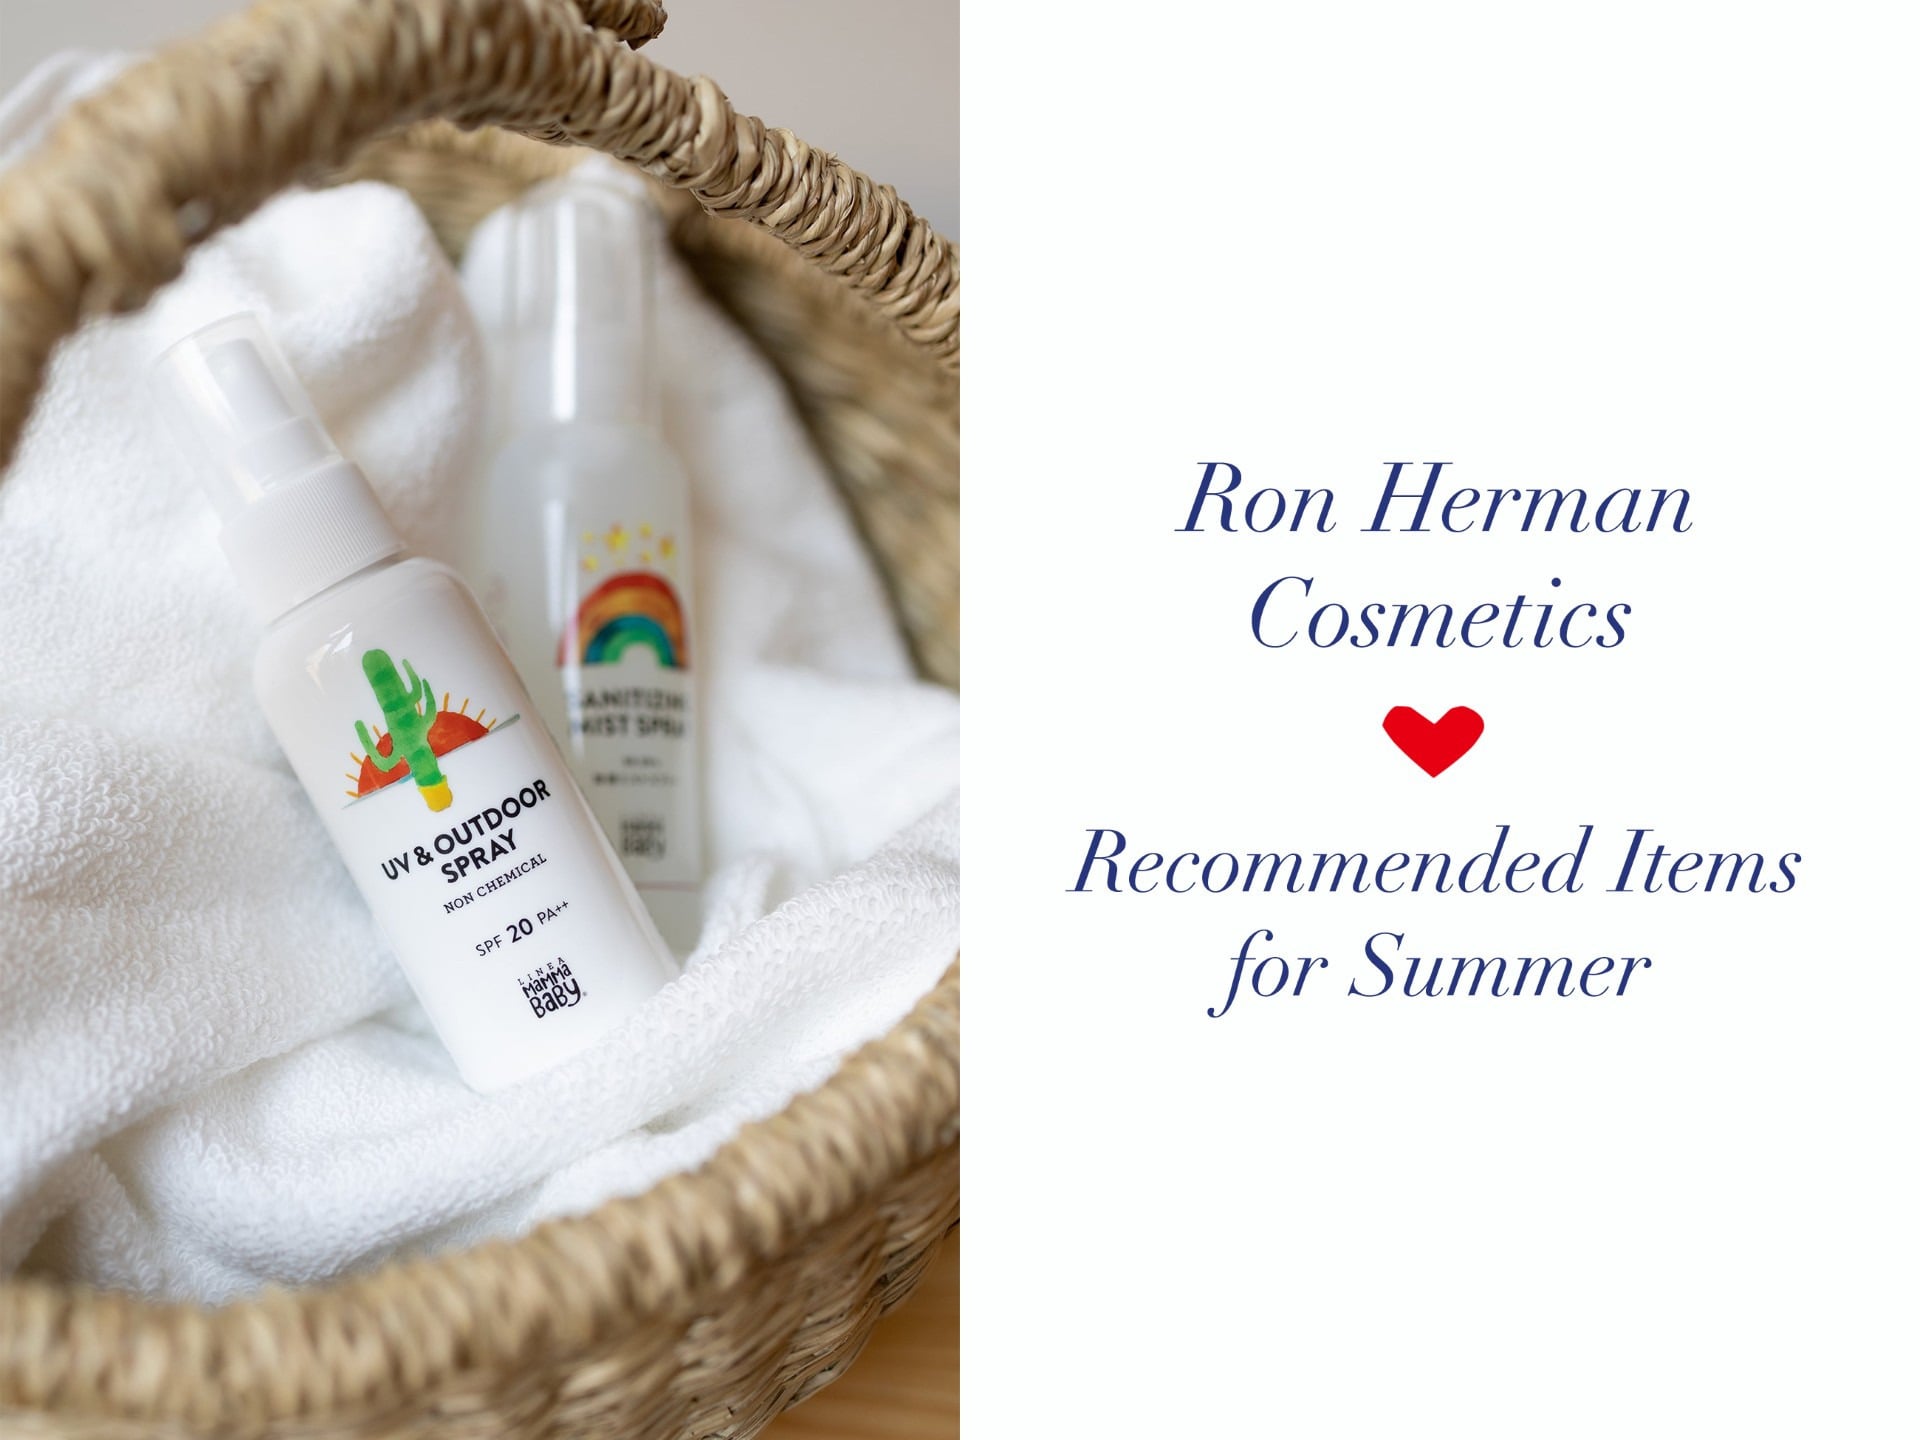 Ron Herman Cosmetics Recommended Items for Summer